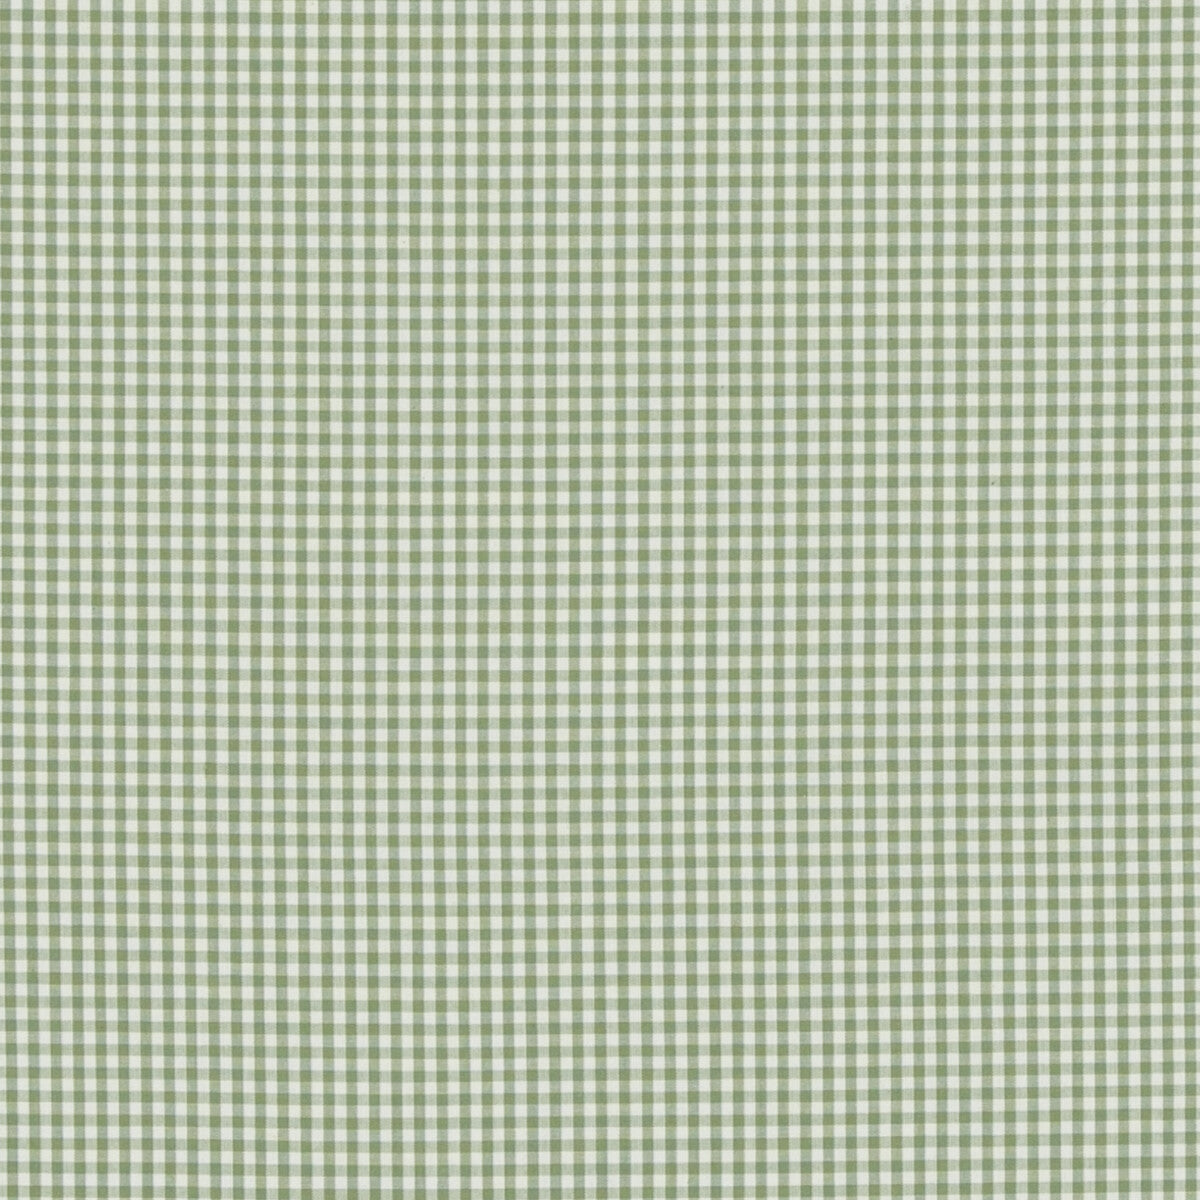 Sherborne Gingham fabric in green color - pattern PF50506.735.0 - by Baker Lifestyle in the Bridport collection